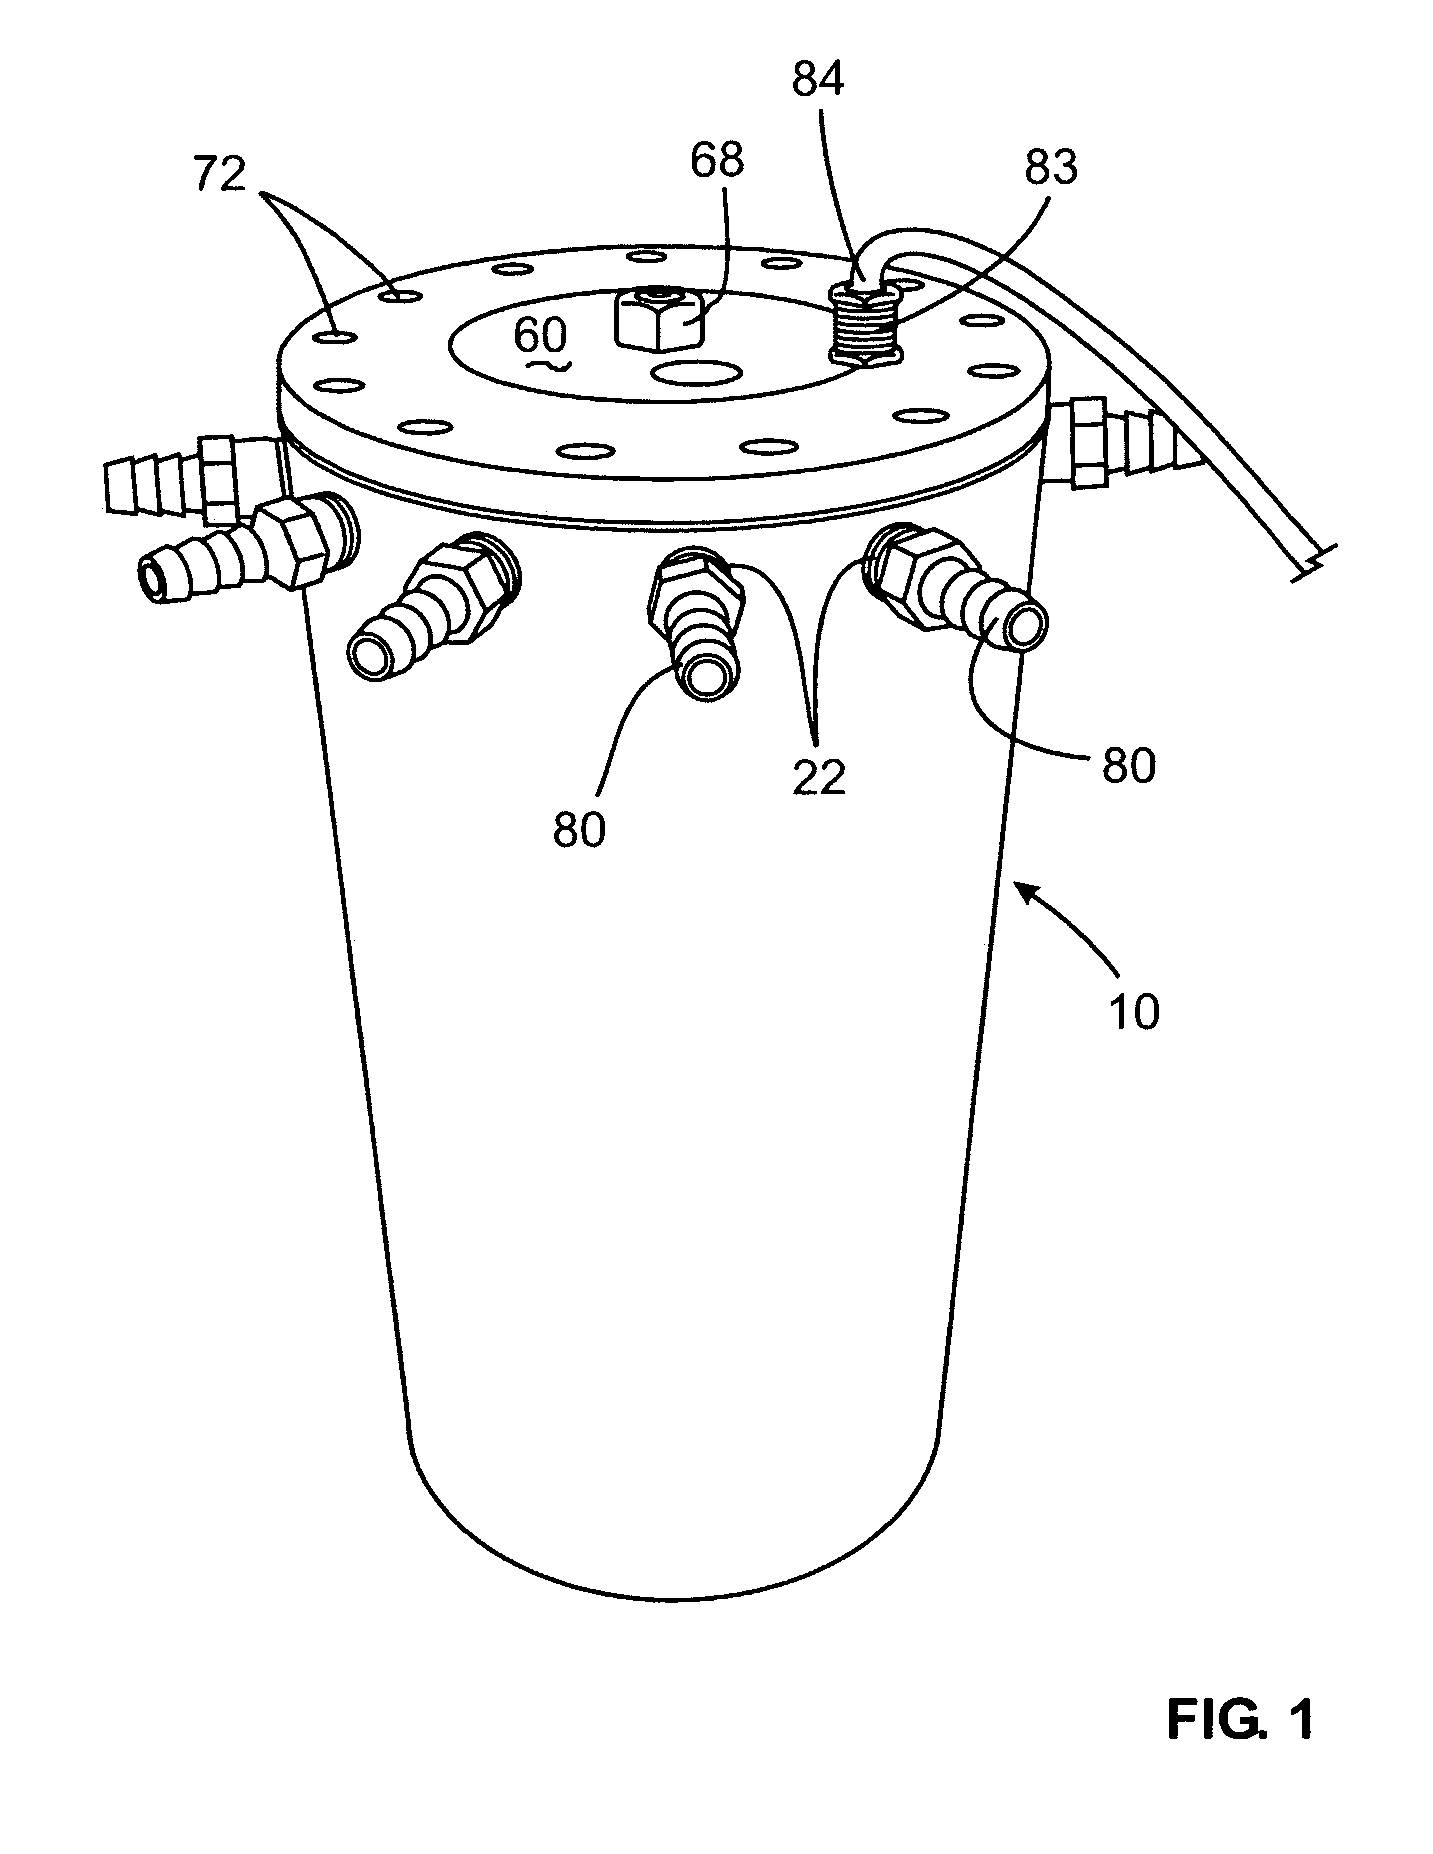 Apparatus and method for reducing anhydrous ammonia application by optimizing distribution